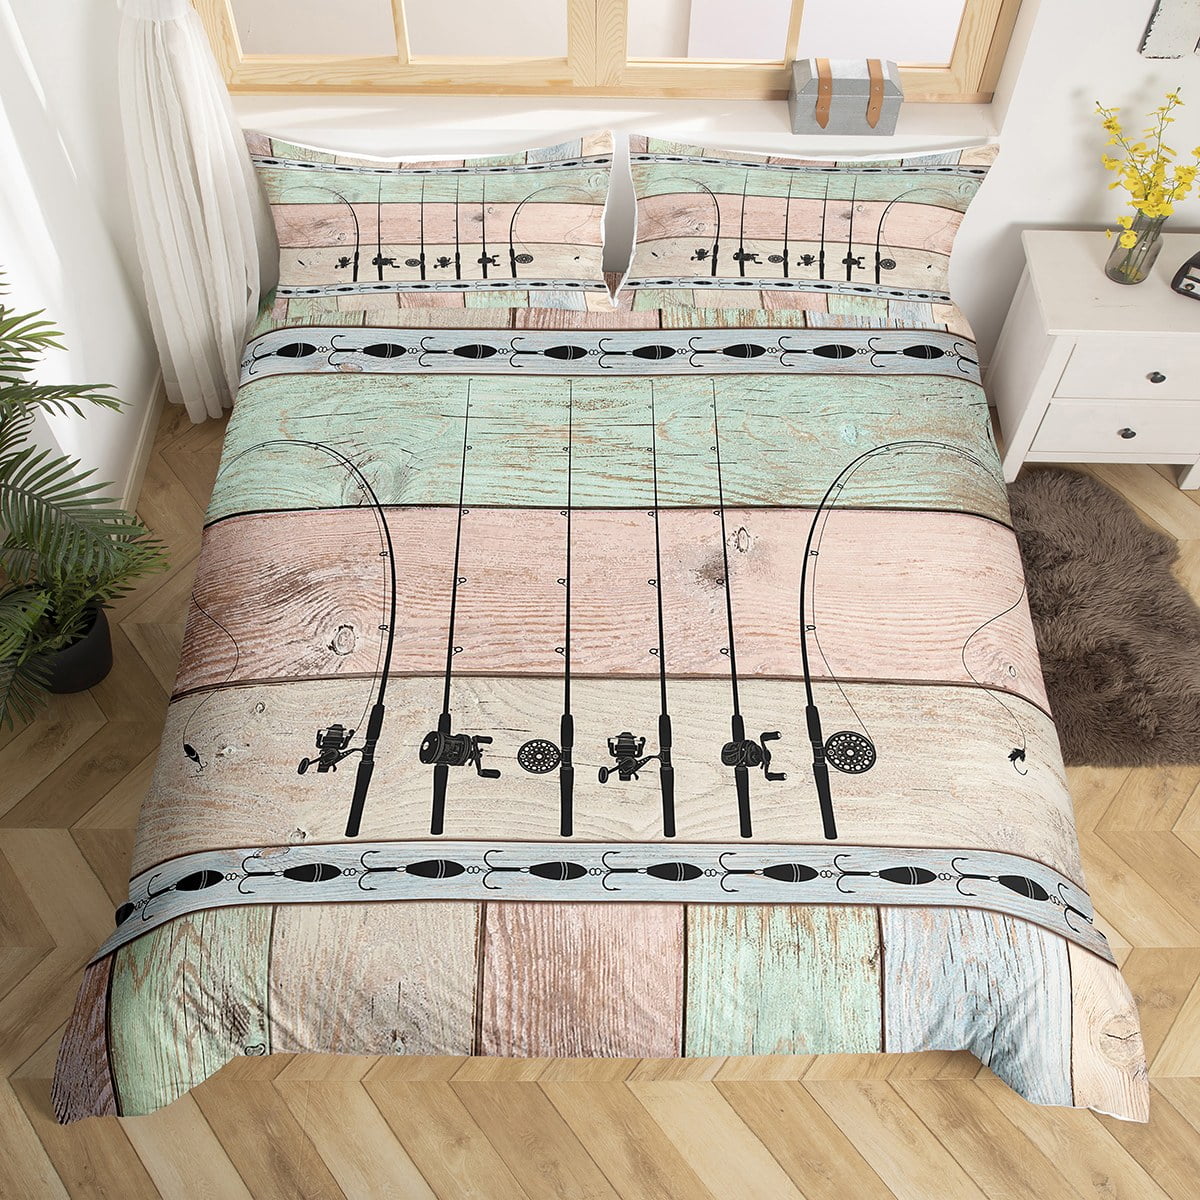  Fish Bedspread Set Fishing Gifts for Men,Ice Fishing Gear Quilt  Set Fishing Coverlet Set Retro Watercolor Wood Fishhook Coverlet Set  Twin,Angling Outdoor Sports Rustic Home Decor Gift for Fisherman : Home